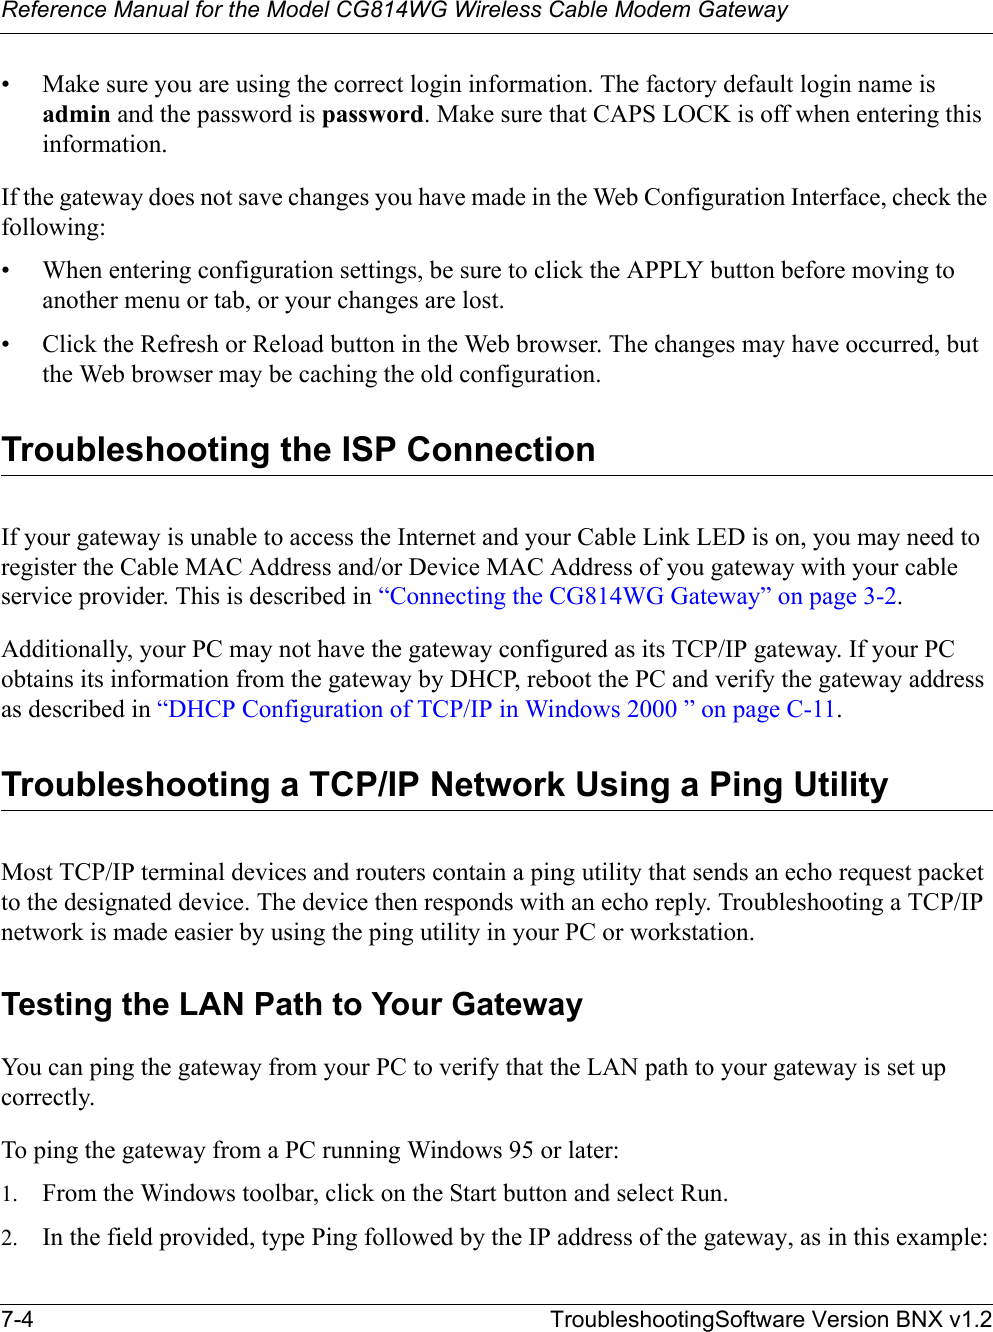 Reference Manual for the Model CG814WG Wireless Cable Modem Gateway7-4 TroubleshootingSoftware Version BNX v1.2• Make sure you are using the correct login information. The factory default login name is admin and the password is password. Make sure that CAPS LOCK is off when entering this information.If the gateway does not save changes you have made in the Web Configuration Interface, check the following:• When entering configuration settings, be sure to click the APPLY button before moving to another menu or tab, or your changes are lost. • Click the Refresh or Reload button in the Web browser. The changes may have occurred, but the Web browser may be caching the old configuration.Troubleshooting the ISP ConnectionIf your gateway is unable to access the Internet and your Cable Link LED is on, you may need to register the Cable MAC Address and/or Device MAC Address of you gateway with your cable service provider. This is described in “Connecting the CG814WG Gateway” on page 3-2.Additionally, your PC may not have the gateway configured as its TCP/IP gateway. If your PC obtains its information from the gateway by DHCP, reboot the PC and verify the gateway address as described in “DHCP Configuration of TCP/IP in Windows 2000 ” on page C-11.Troubleshooting a TCP/IP Network Using a Ping UtilityMost TCP/IP terminal devices and routers contain a ping utility that sends an echo request packet to the designated device. The device then responds with an echo reply. Troubleshooting a TCP/IP network is made easier by using the ping utility in your PC or workstation.Testing the LAN Path to Your GatewayYou can ping the gateway from your PC to verify that the LAN path to your gateway is set up correctly.To ping the gateway from a PC running Windows 95 or later:1. From the Windows toolbar, click on the Start button and select Run.2. In the field provided, type Ping followed by the IP address of the gateway, as in this example: